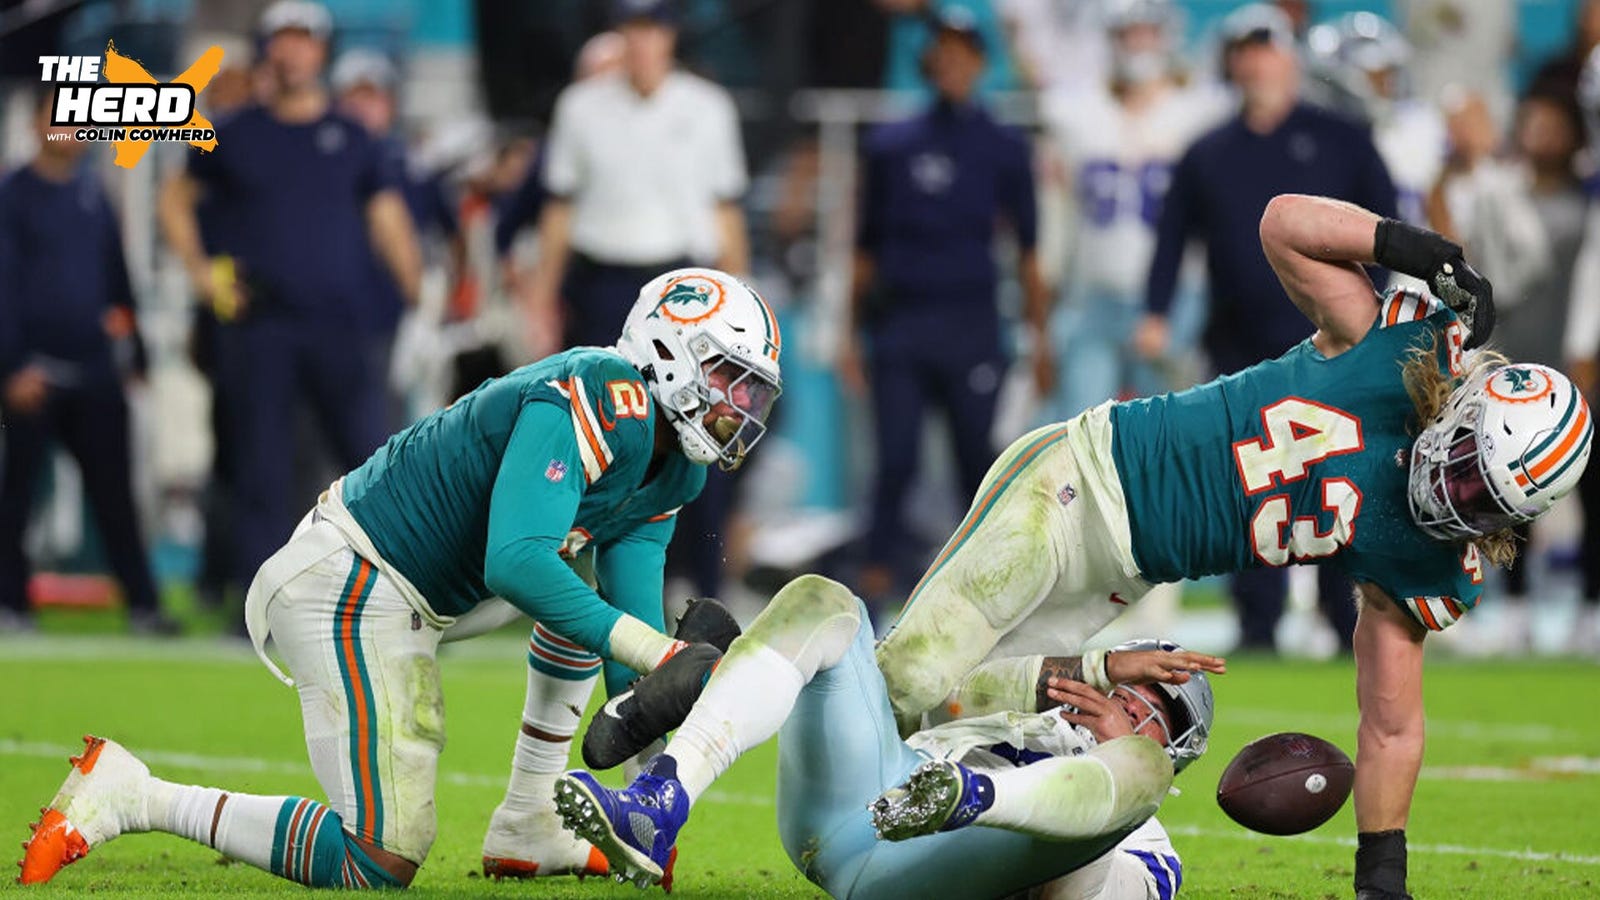 Can Cowboys bounce back after two straight losses vs. Bills, Dolphins?